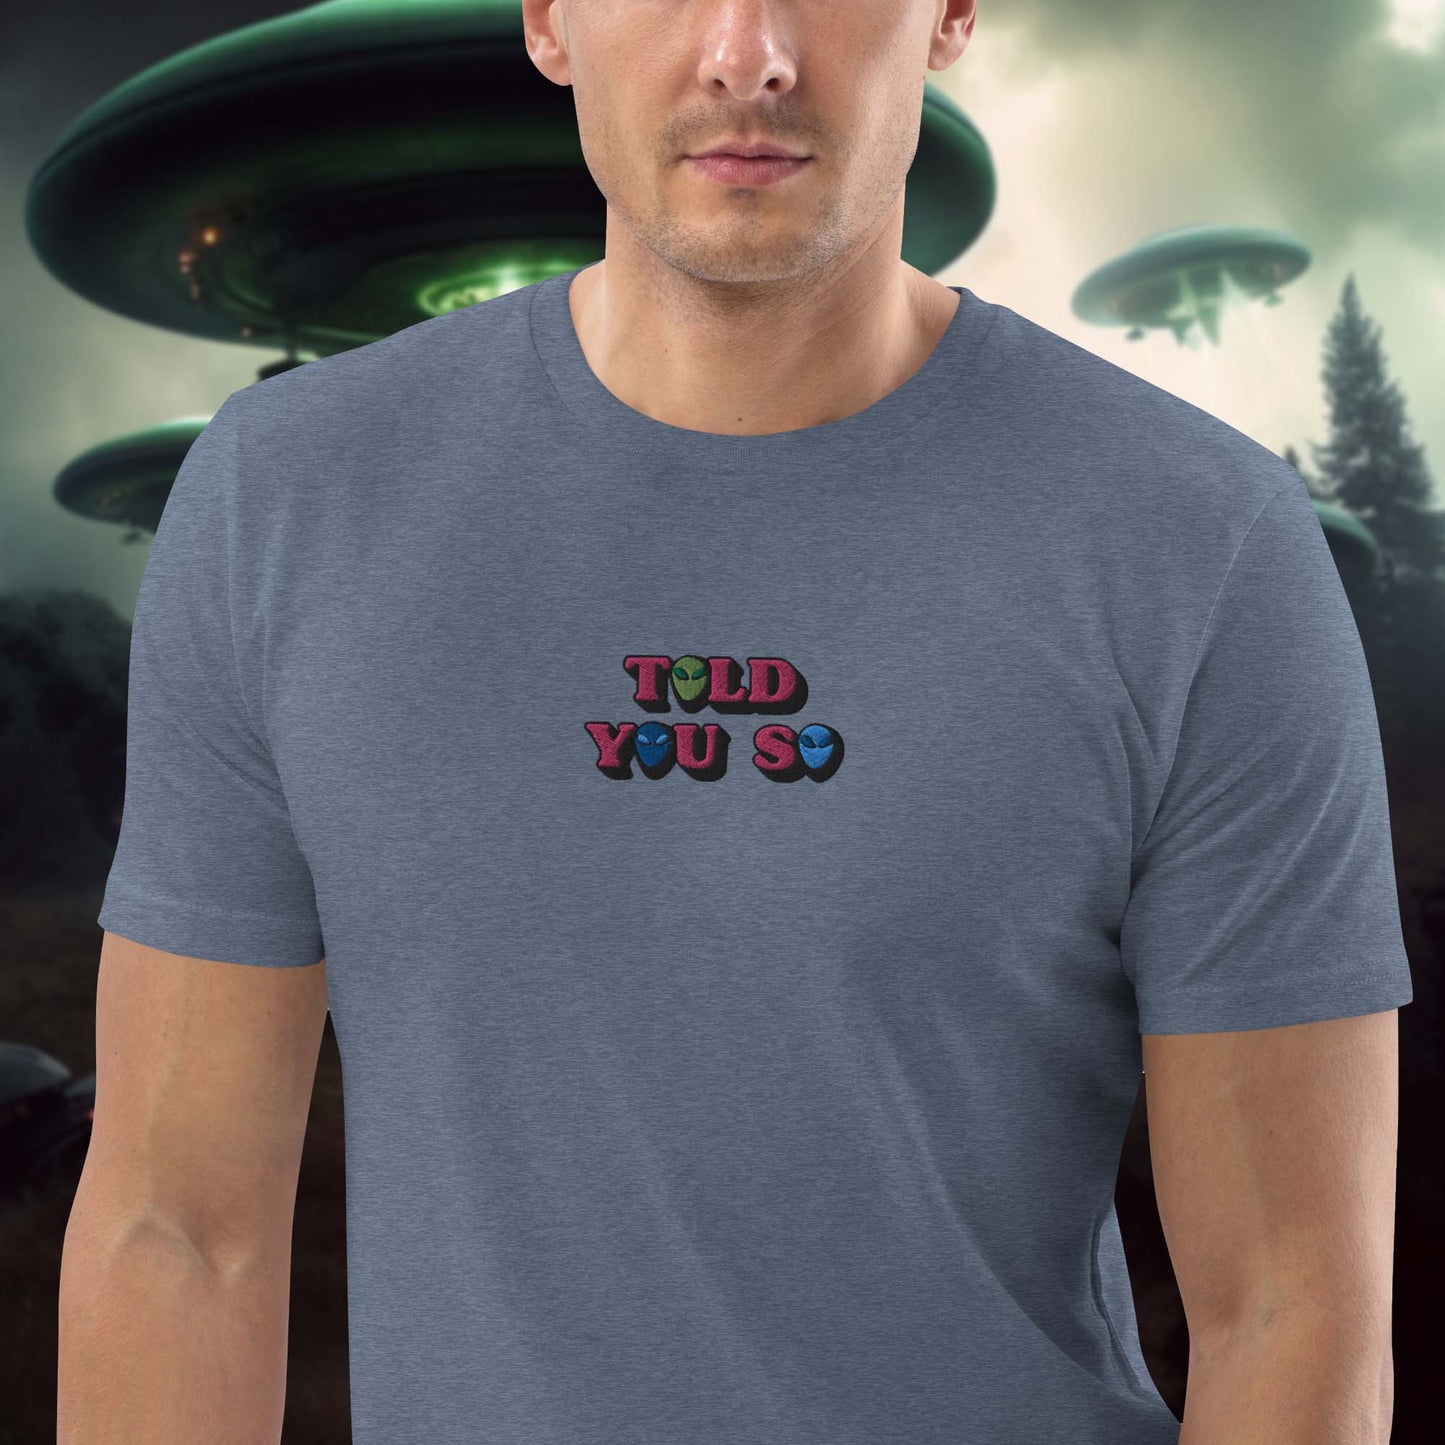 Told you so T-shirt for men who believe the aliens are already living among us on earth!